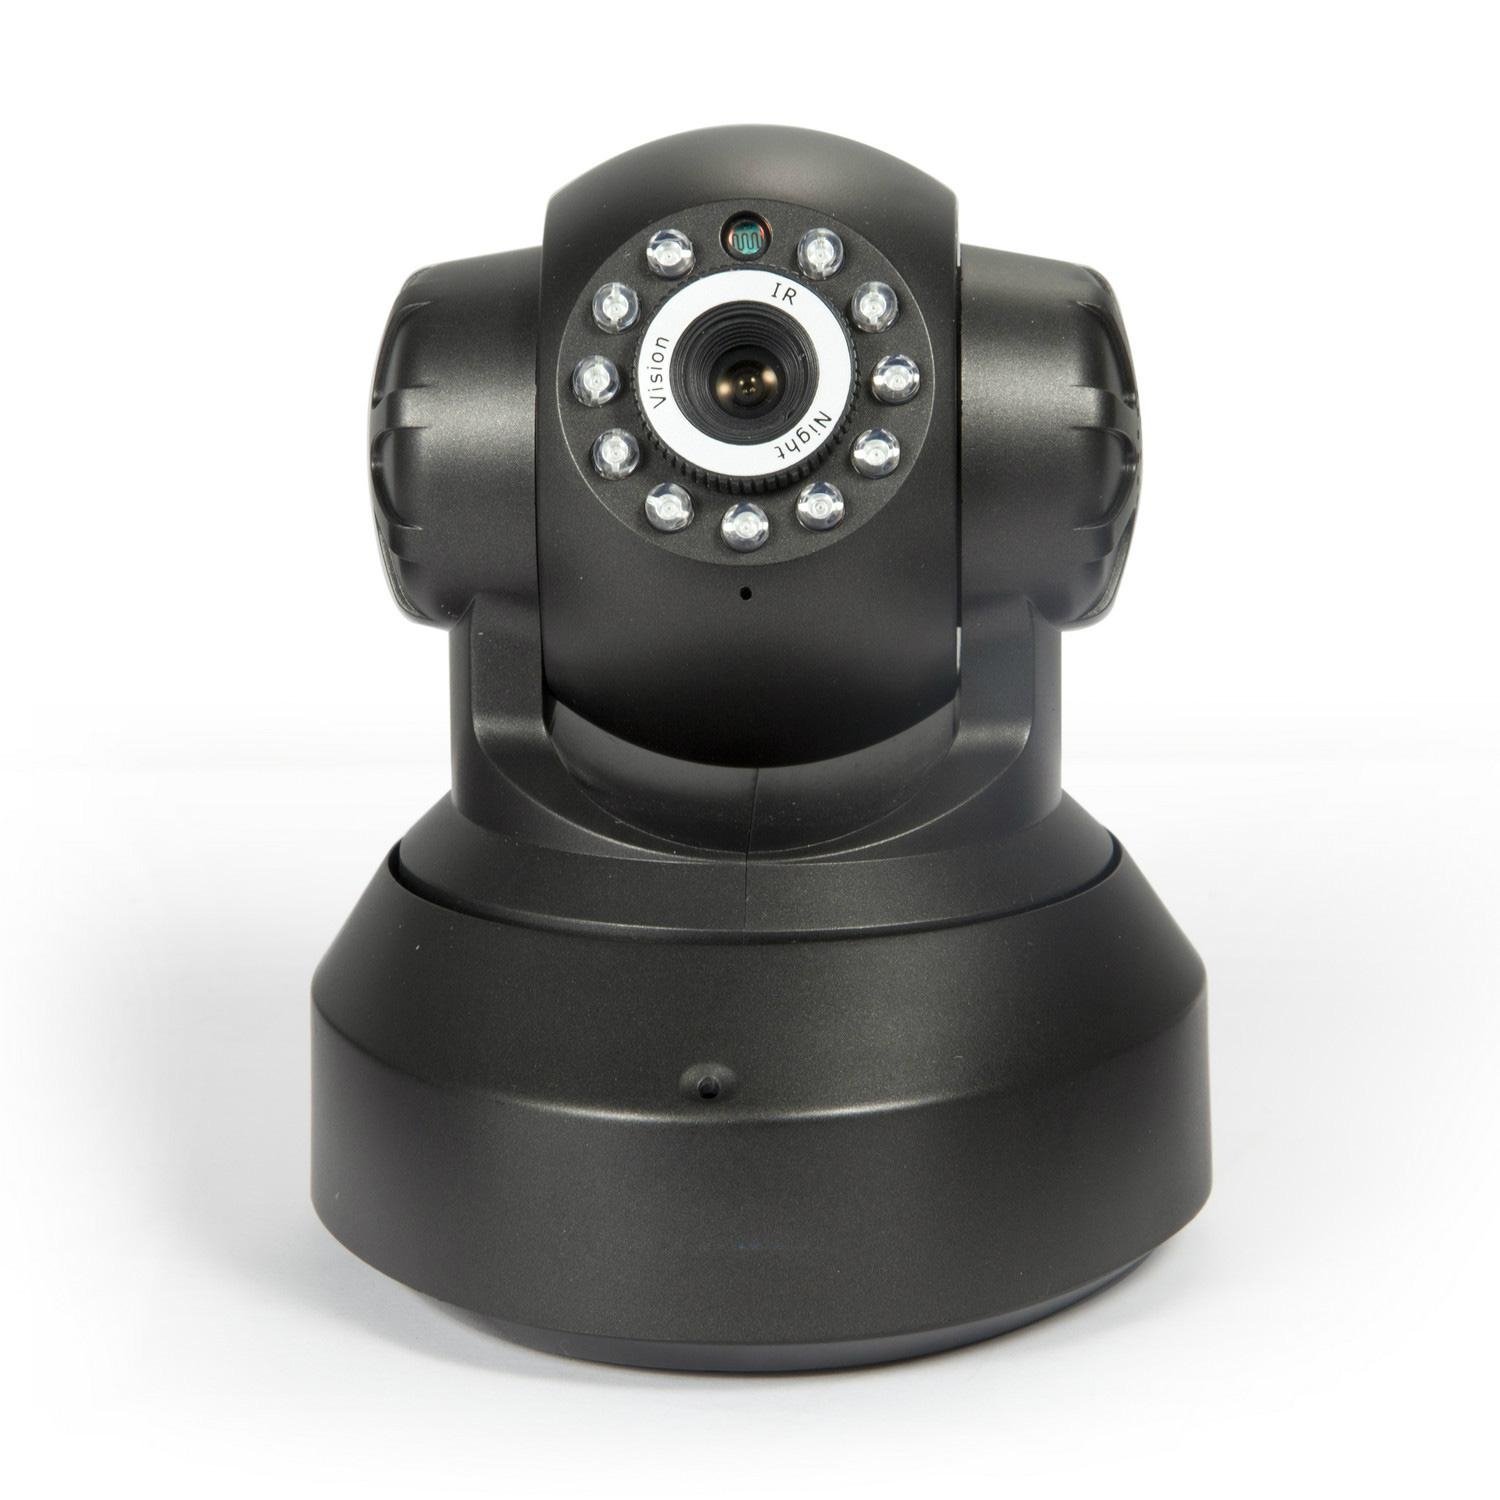 Alytimes Aly002 720p baby cam wifi ip camera 5